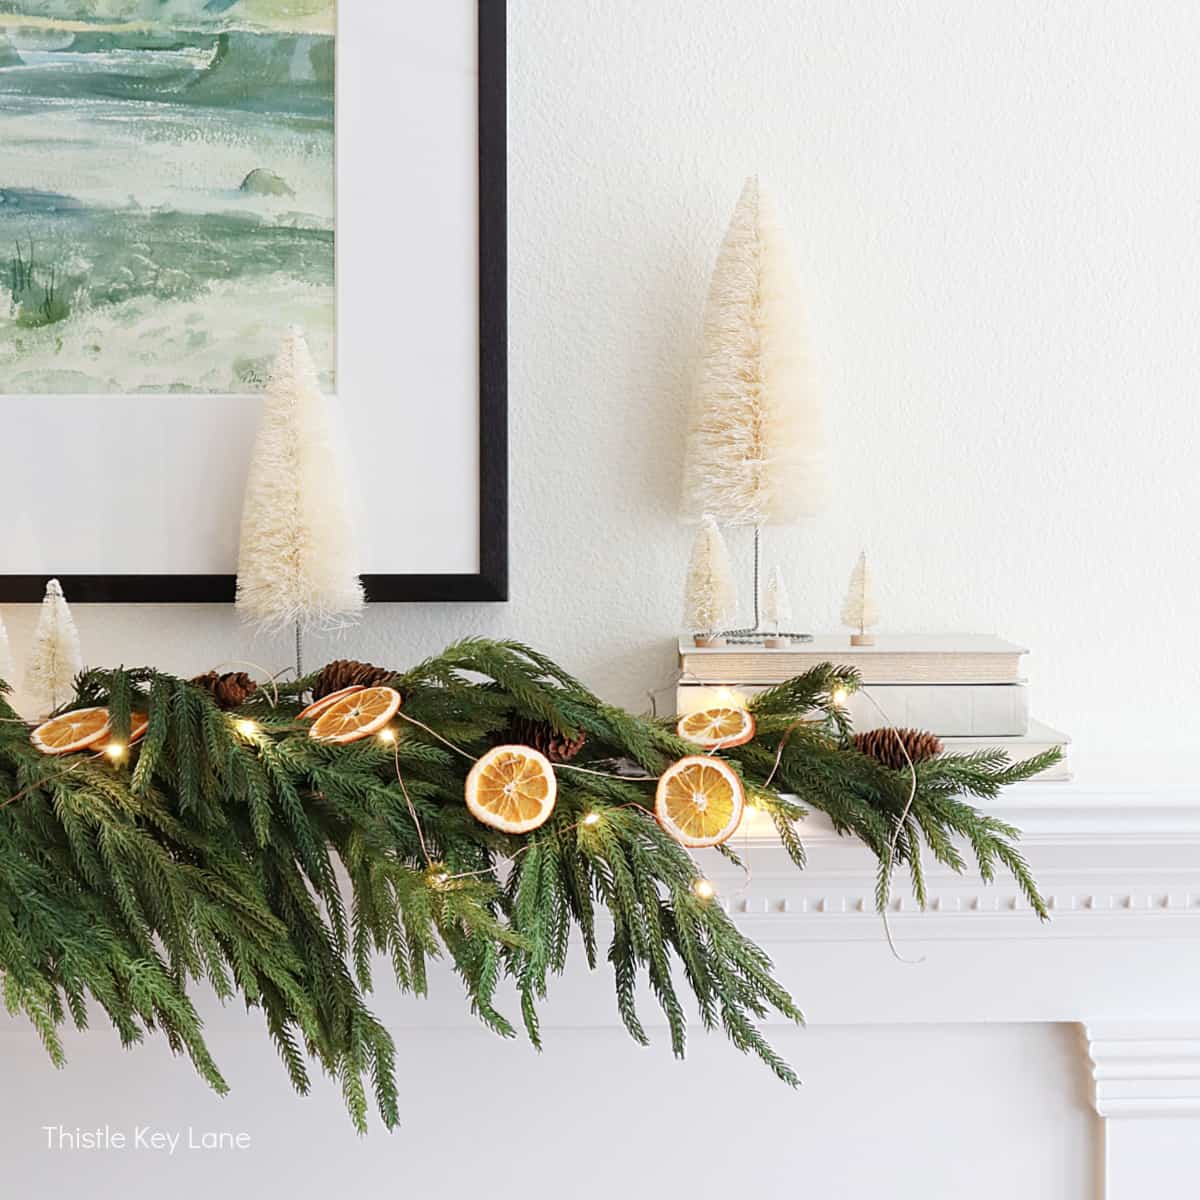 21 Vintage Christmas Decorating Ideas That Give Us the Holiday Feels